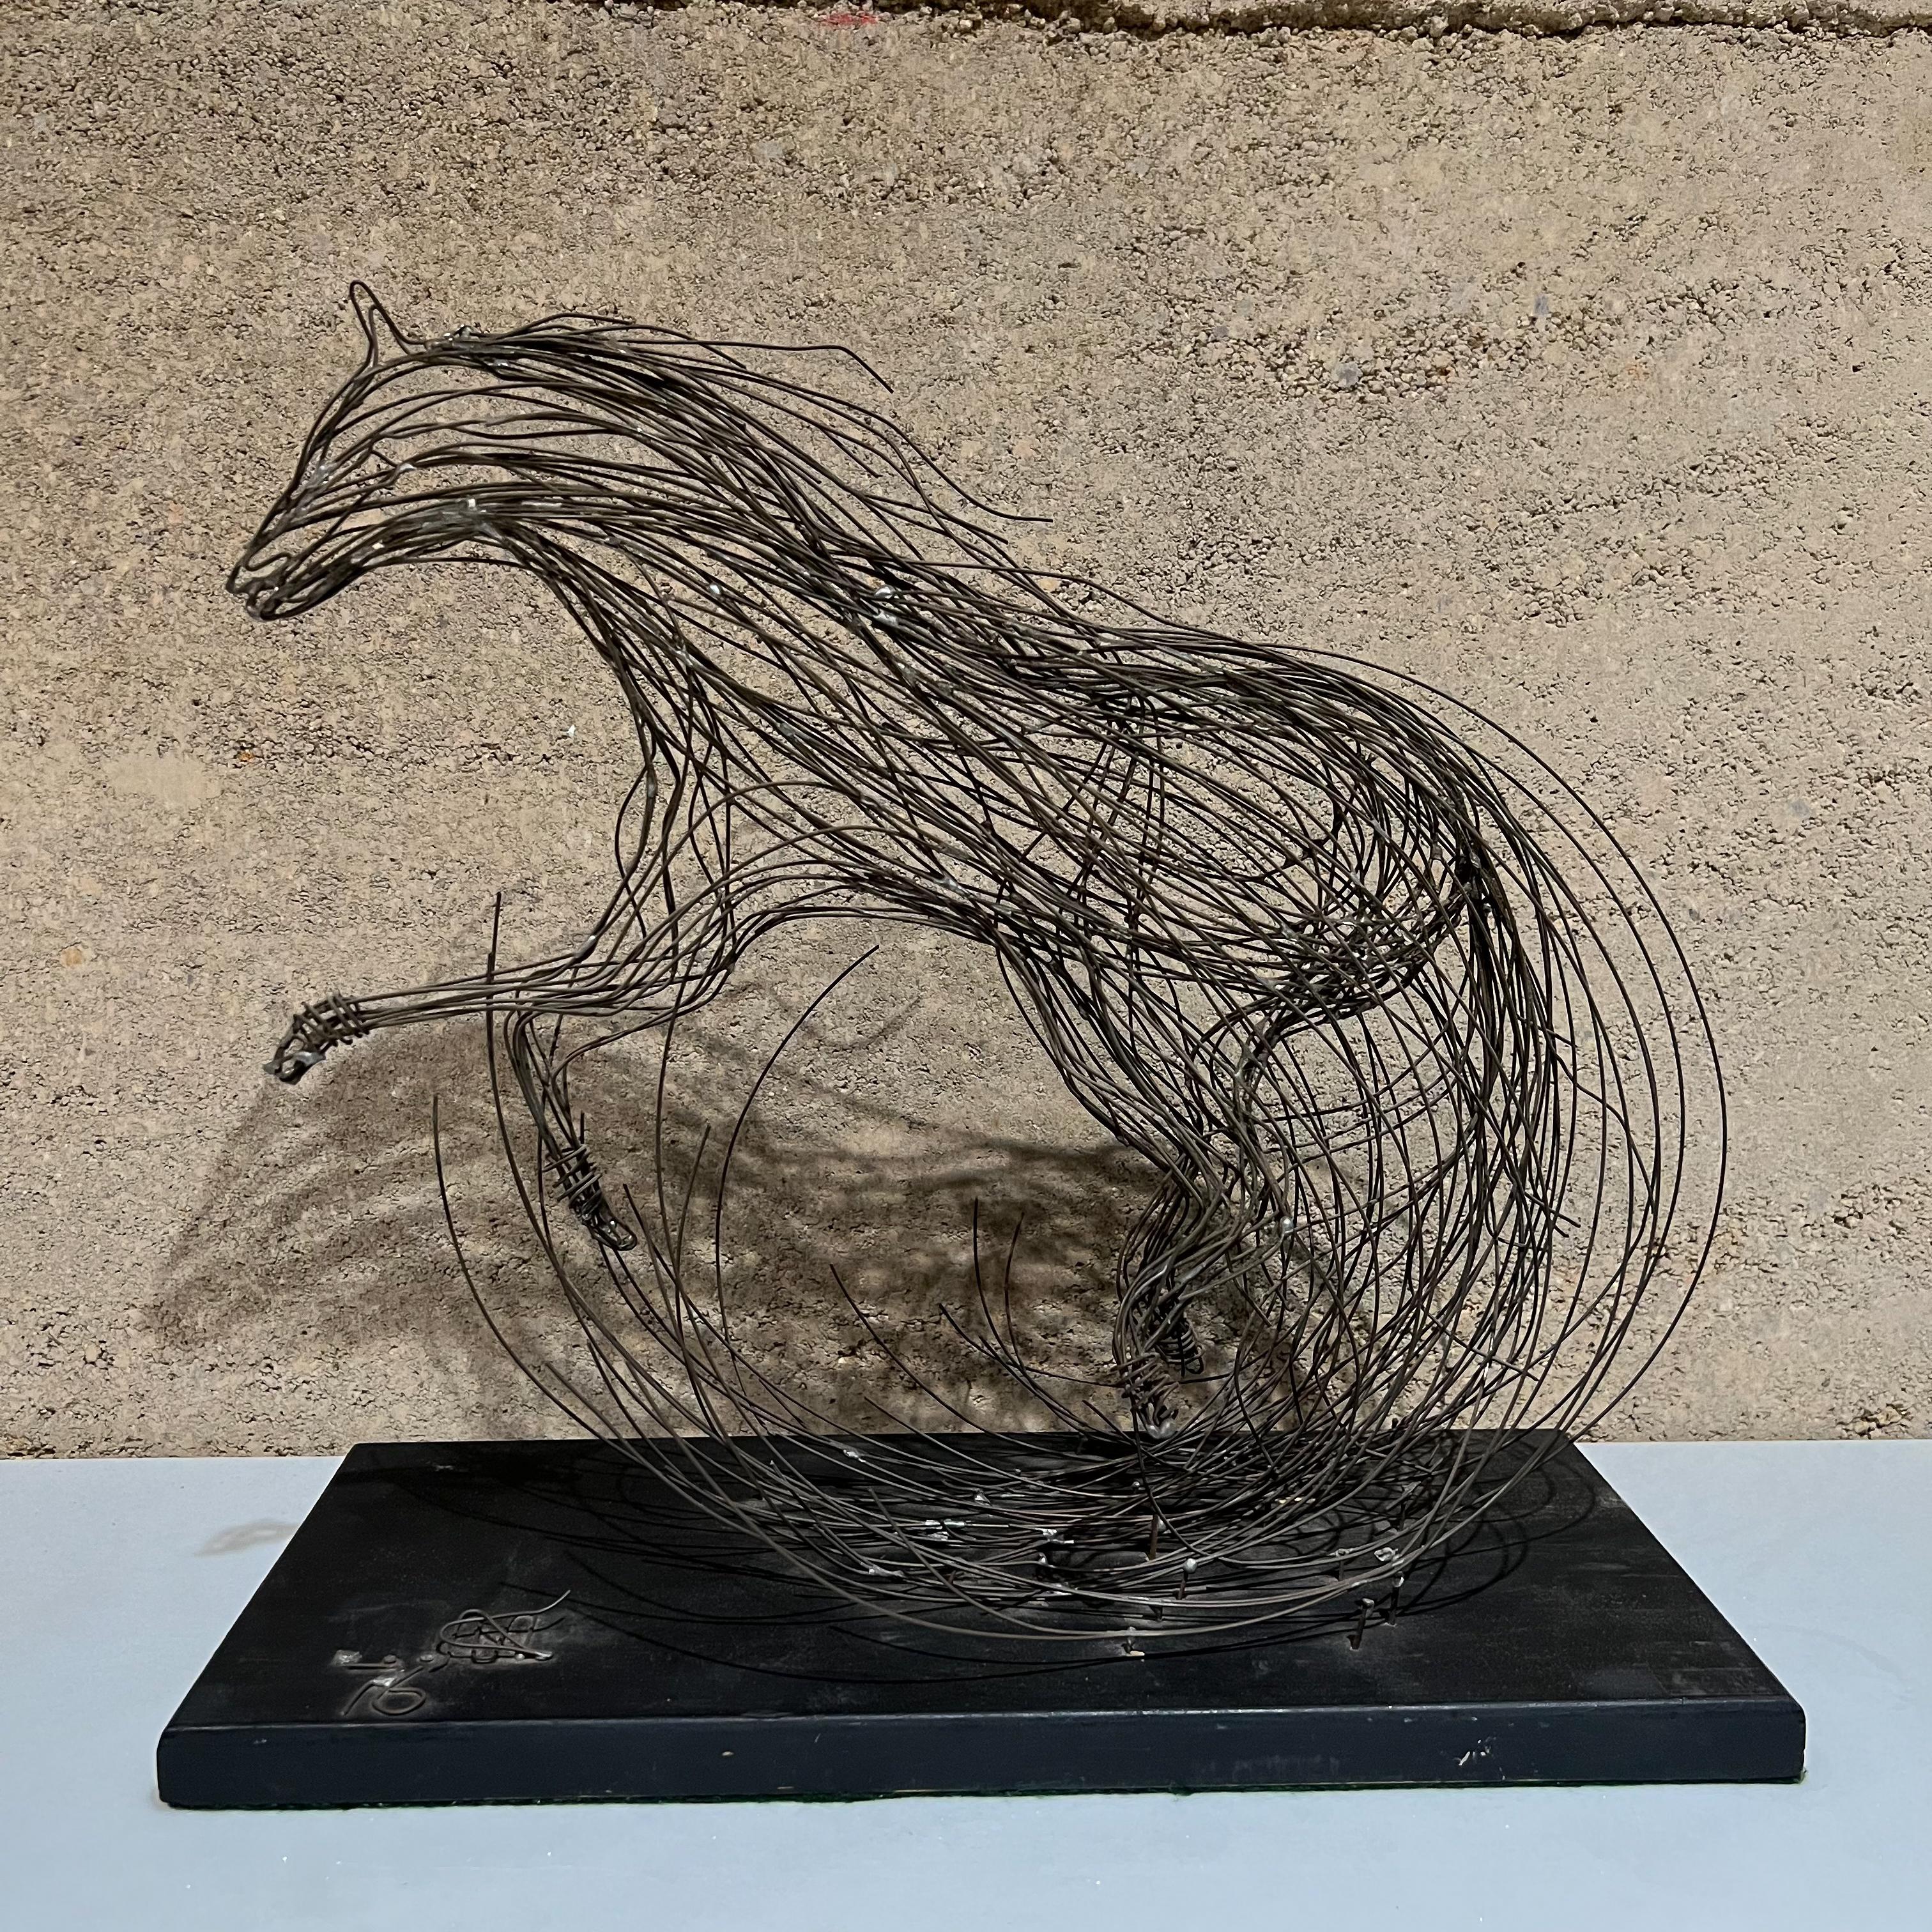 1970s Sculptural Modernism Horse Table Sculpture Brutalist Metal Wire Art
Artist's signature in wire nailed to wood base. Part of signature is missing. 
Unable to read.
14.5 tall x 15.25 w x 7 d
Preowned unrestored vintage condition.
See images